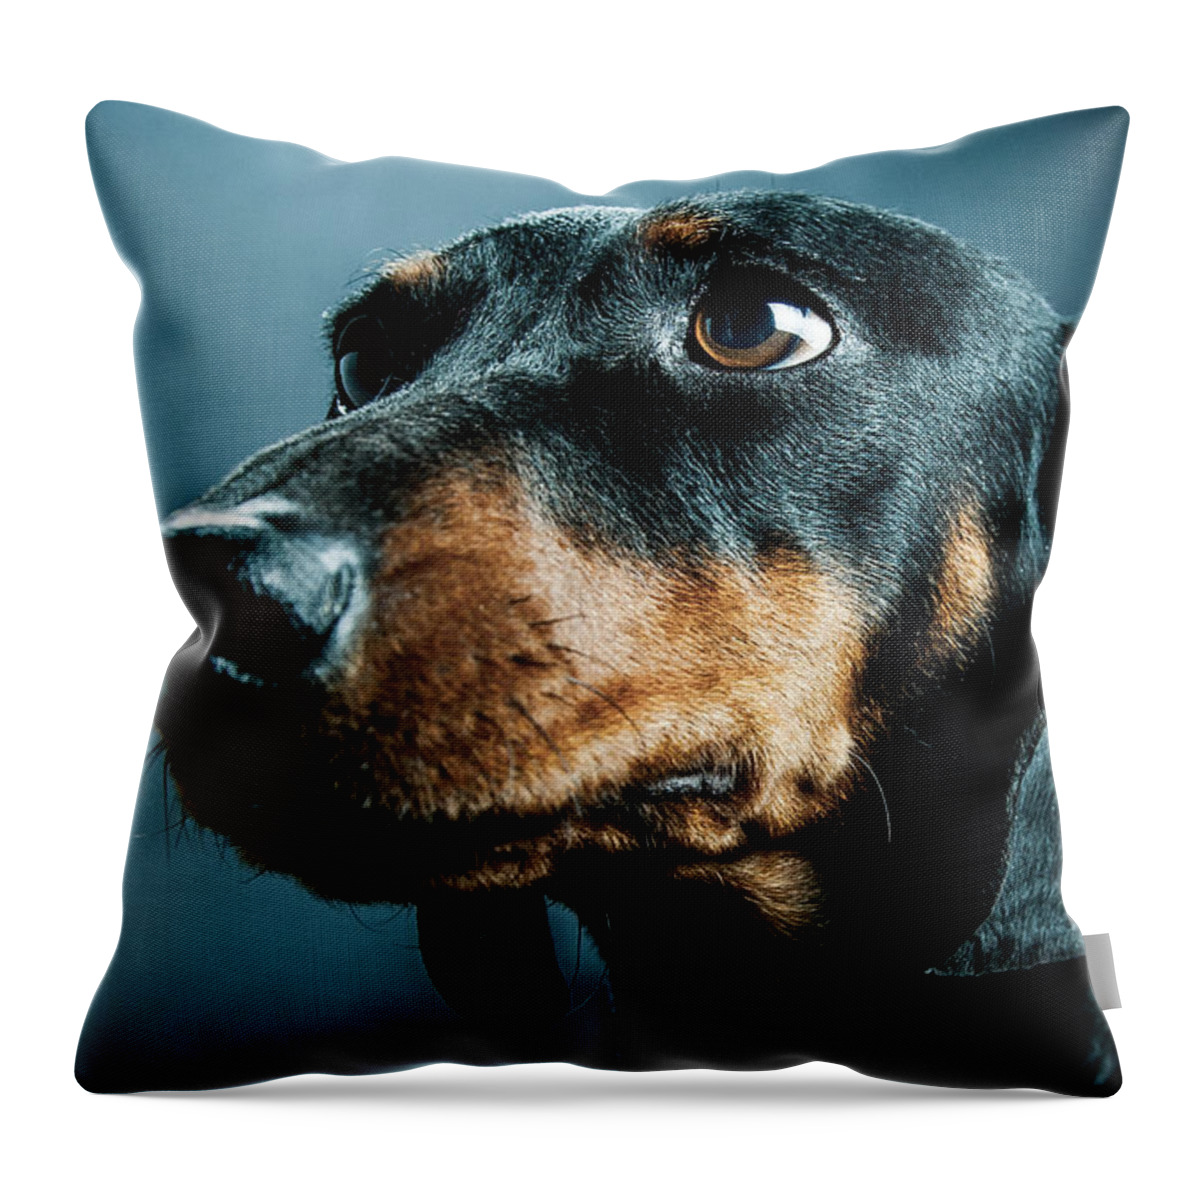 Steven Green Throw Pillow featuring the photograph Bunny by SR Green